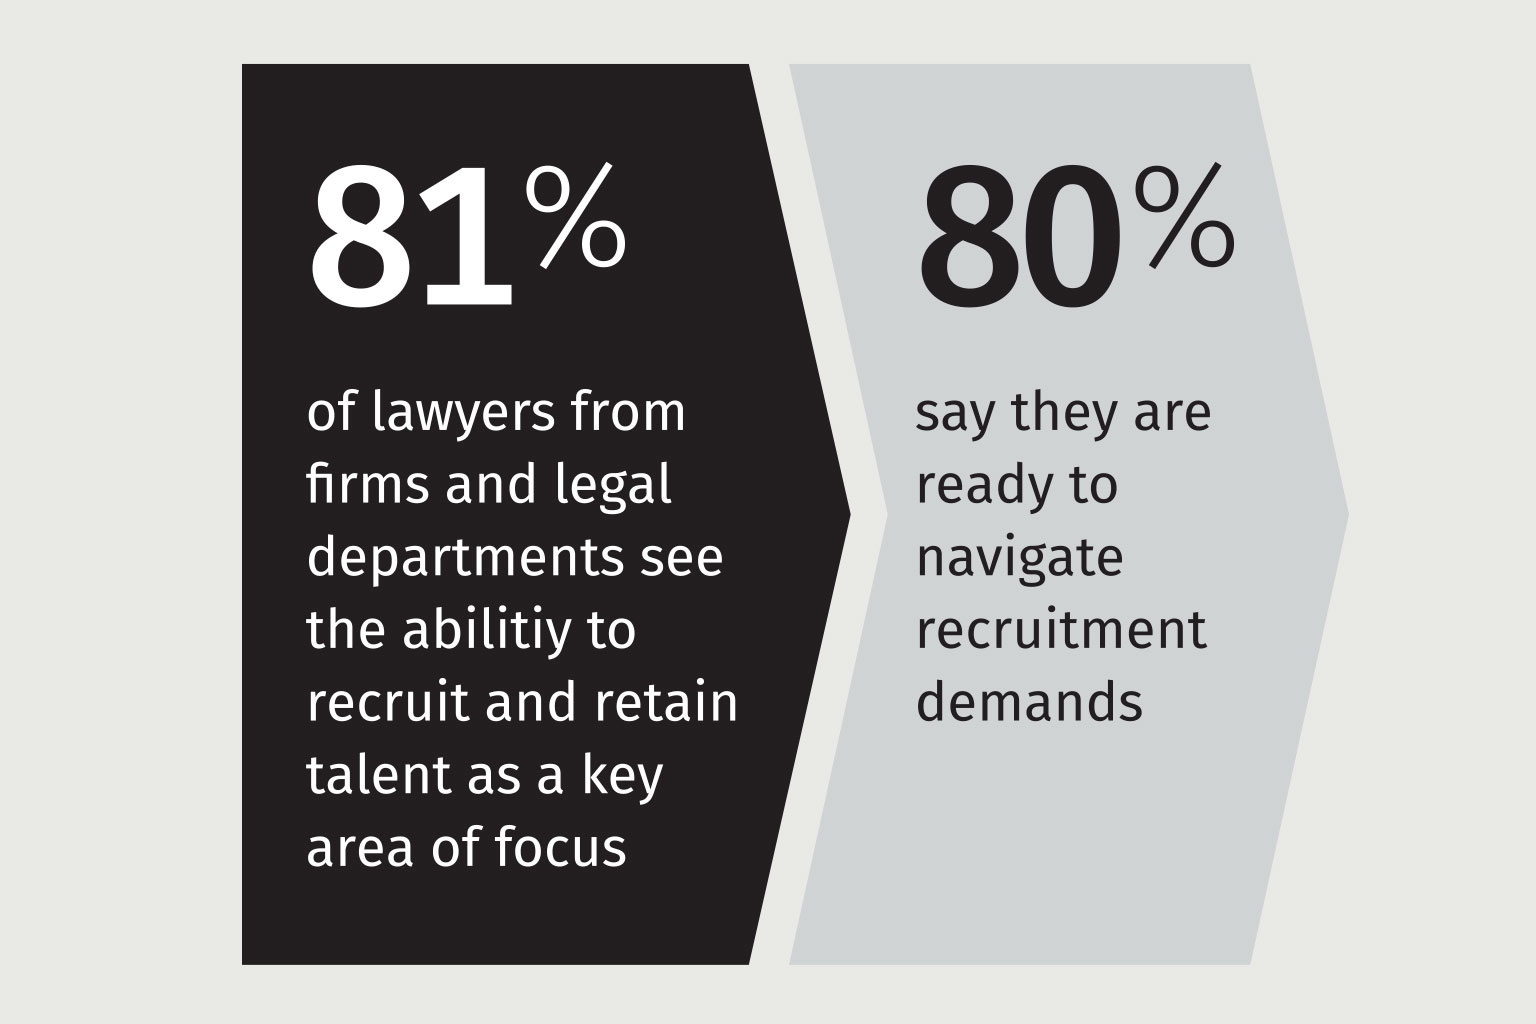 Recruiting and retaining talent is a key challenge for legal sector